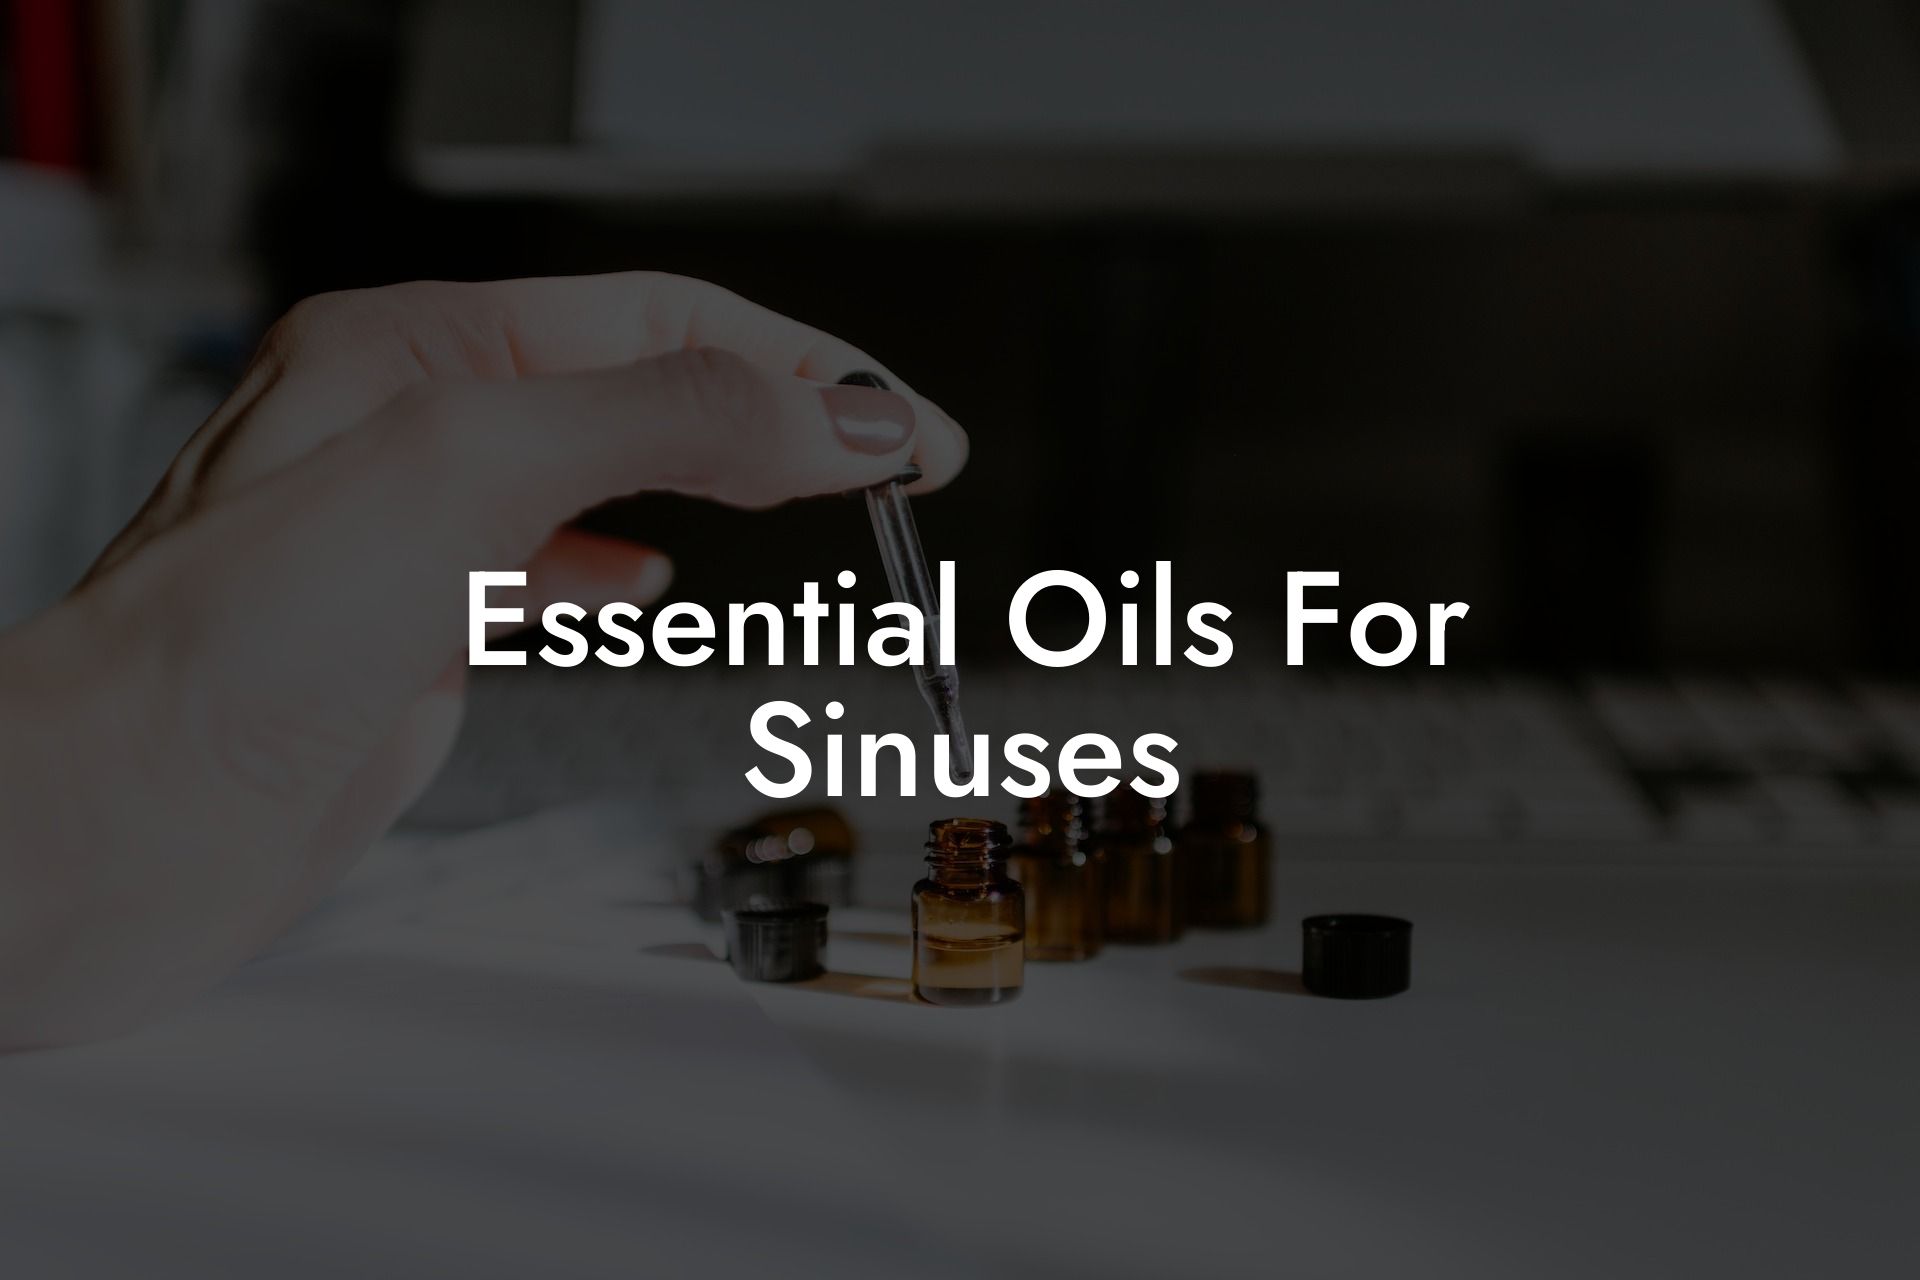 Essential Oils For Sinuses